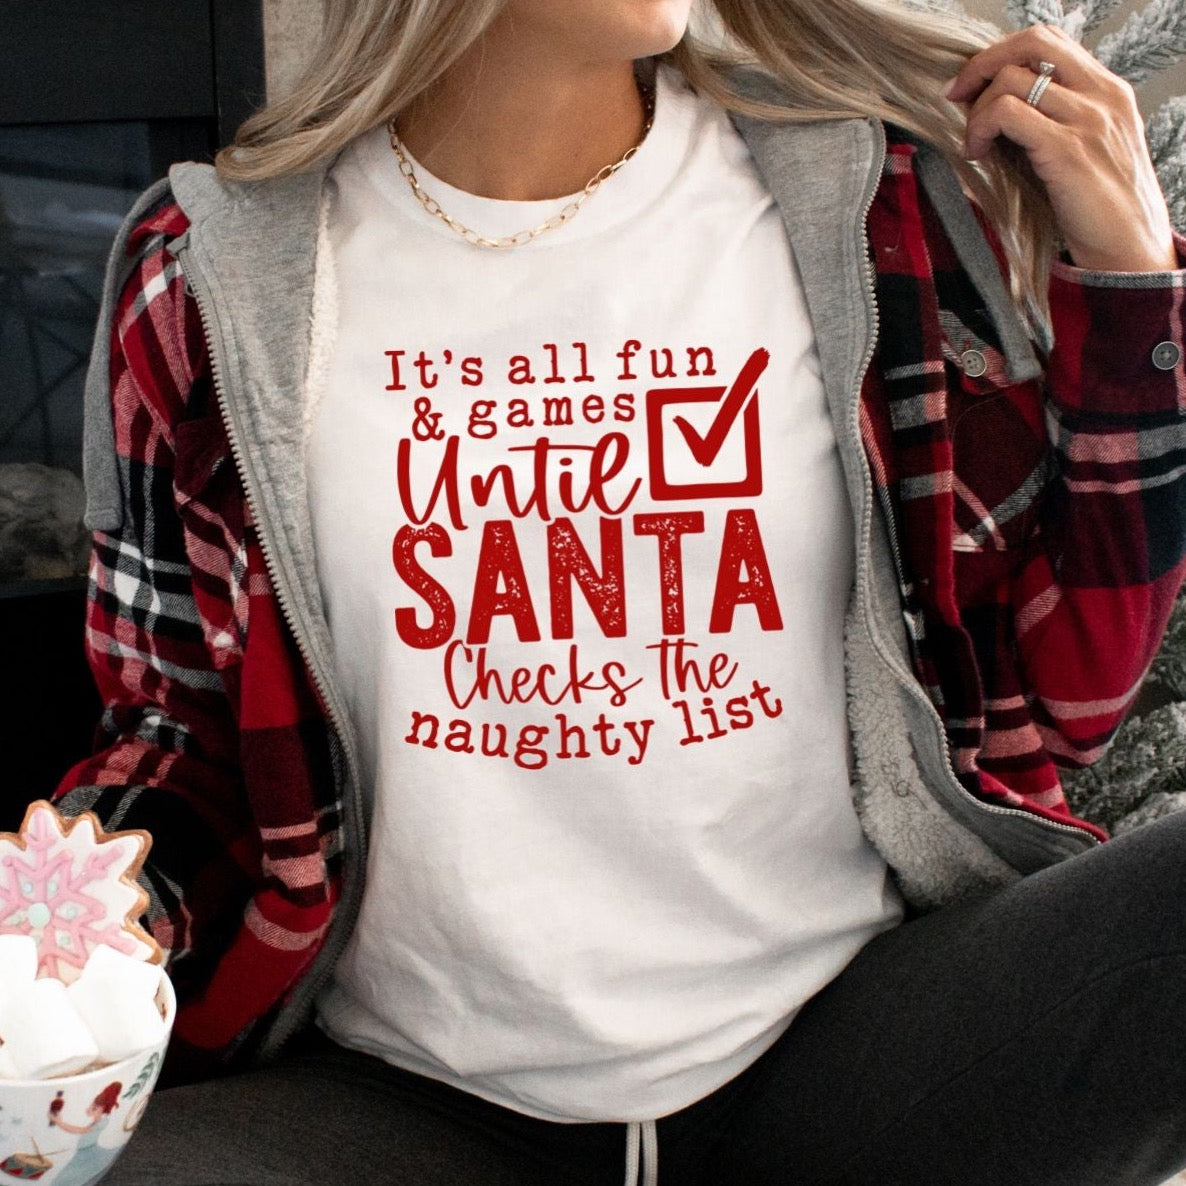 It was all fun and games until Santa Checked the Naughty List - Christmas Tee